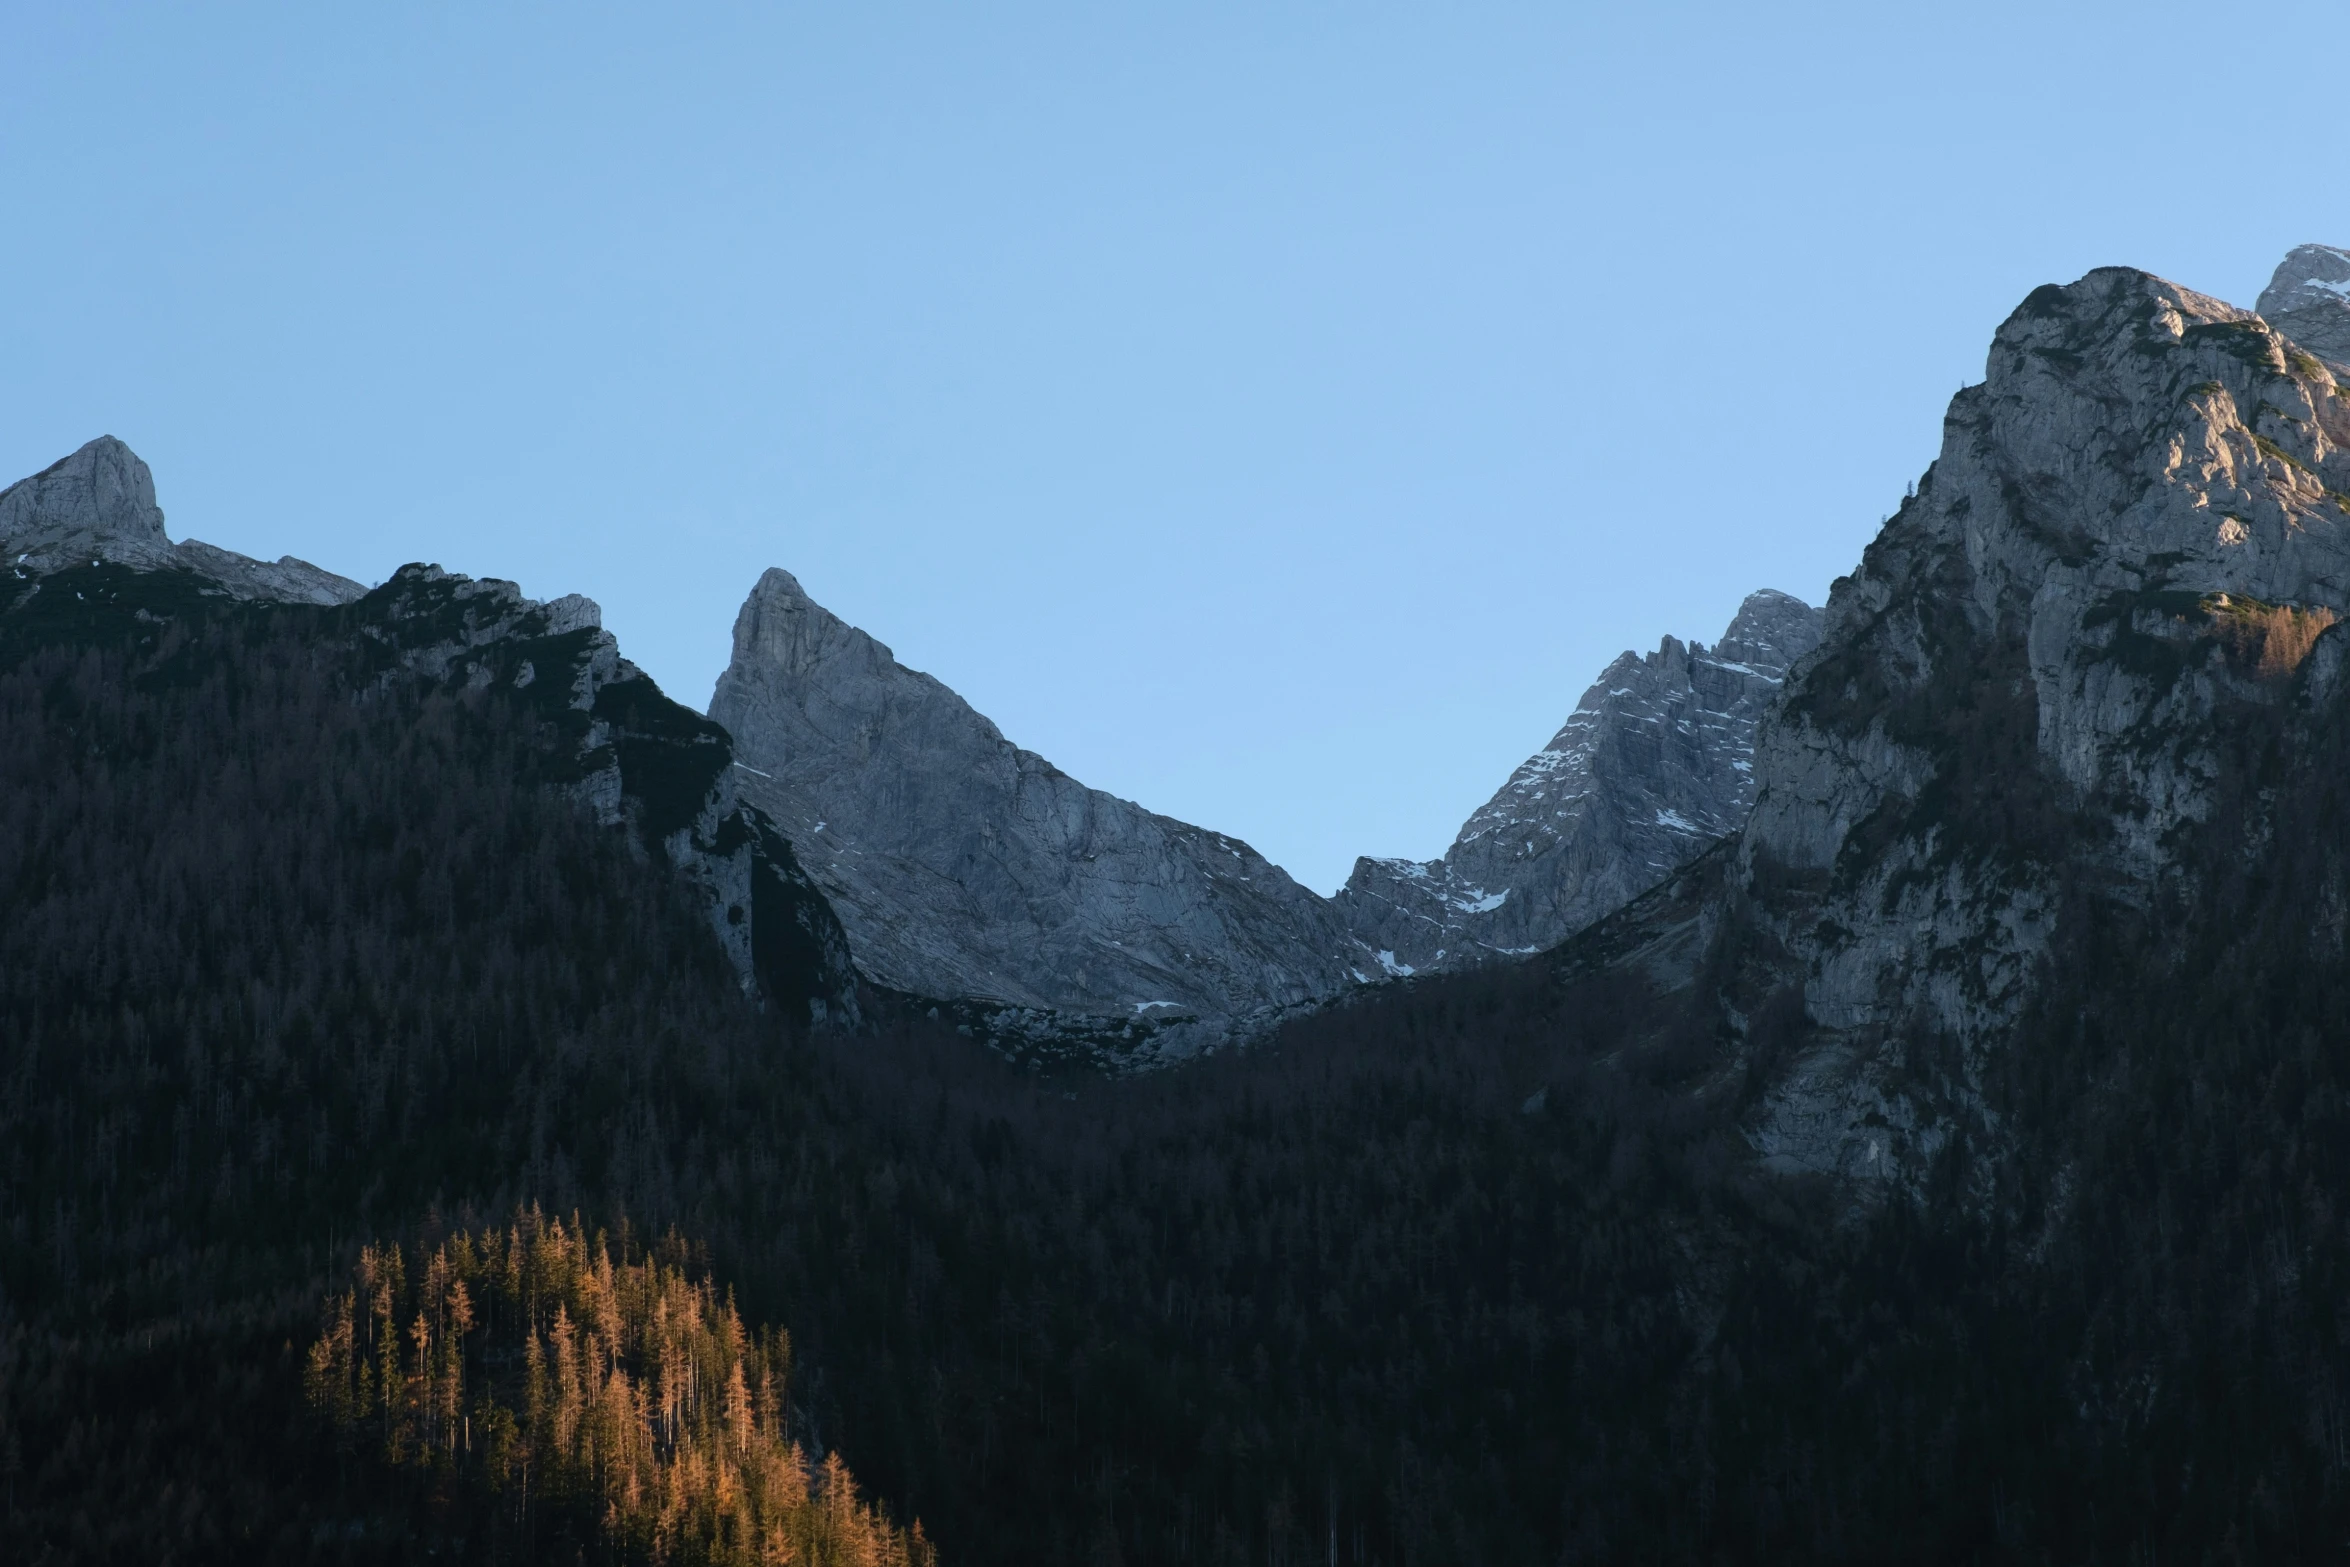 two mountain peaks rising above some trees